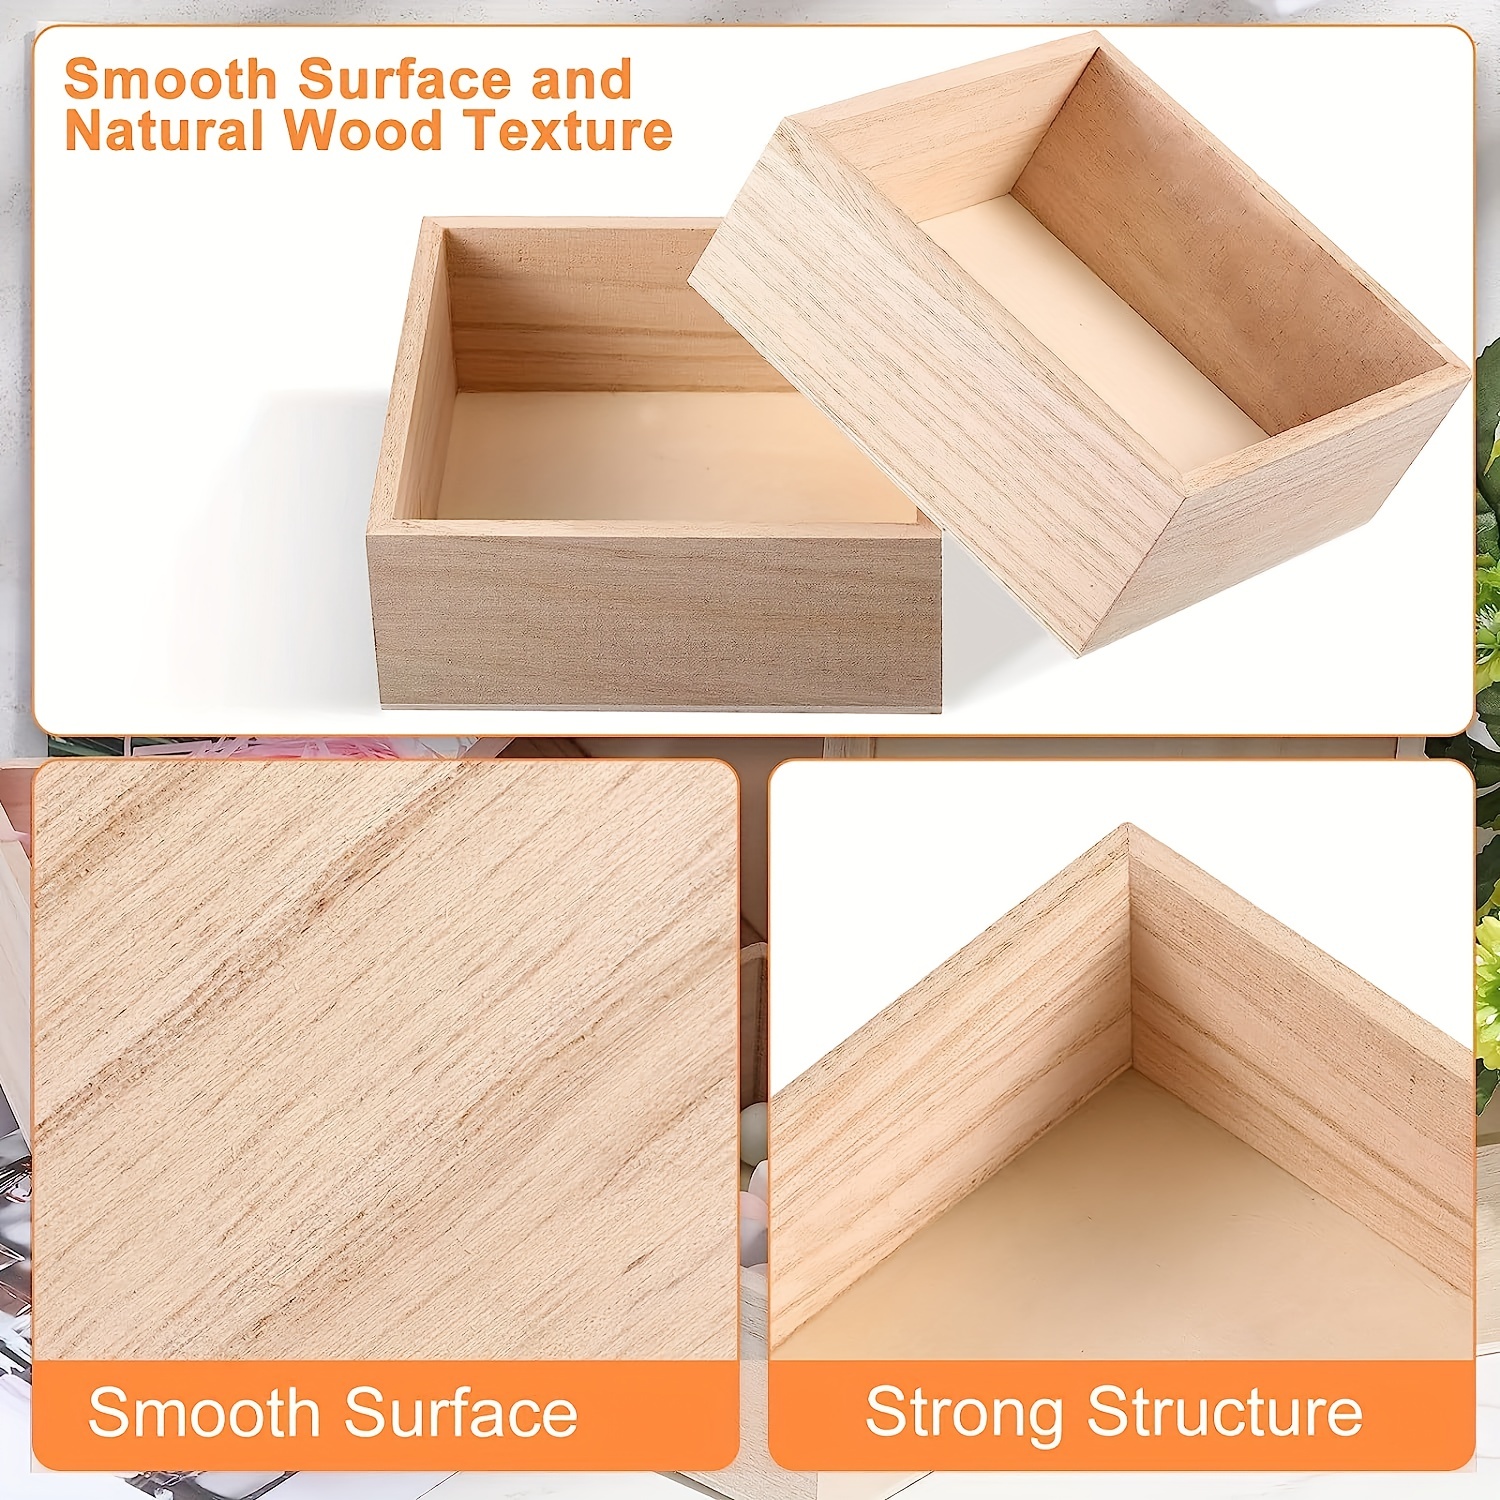 4 Pack Unfinished Wooden Box in 4 Size Rustic Small Square Wood Box for DIY Craft Storage Organizer Centerpiece Box for Home Table Decoration